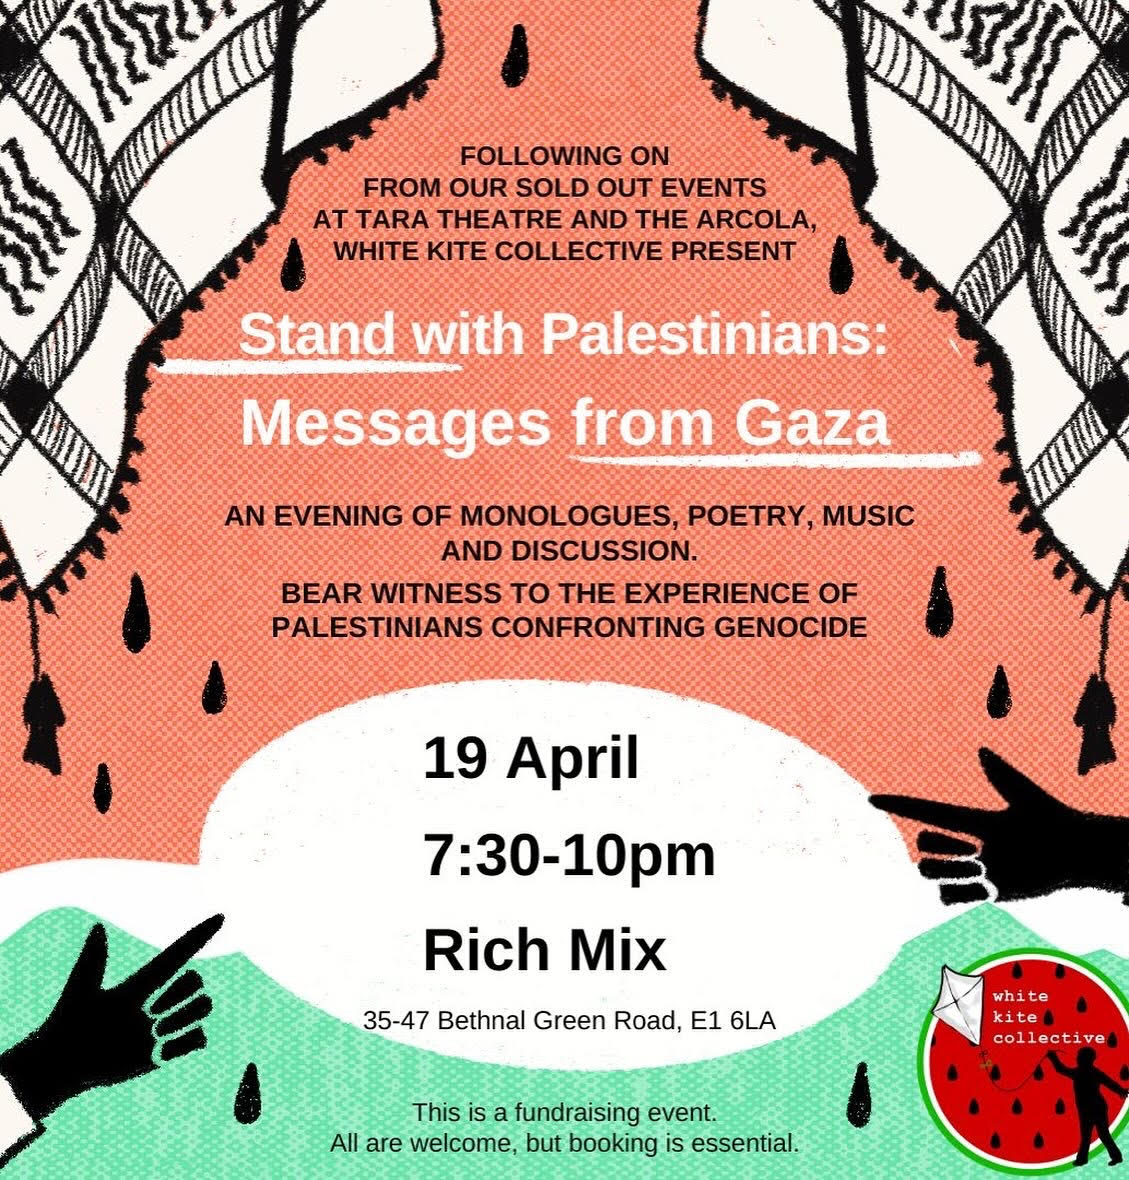 White Kite Collective flying high again this Friday @RichMixLondon. Bear witness to the experience of Palestinians confronting genocide. This fundraiser continues White Kite’s ongoing support for Theatre for Everybody in Gaza. All are welcome: richmix.org.uk/events/stand-w…